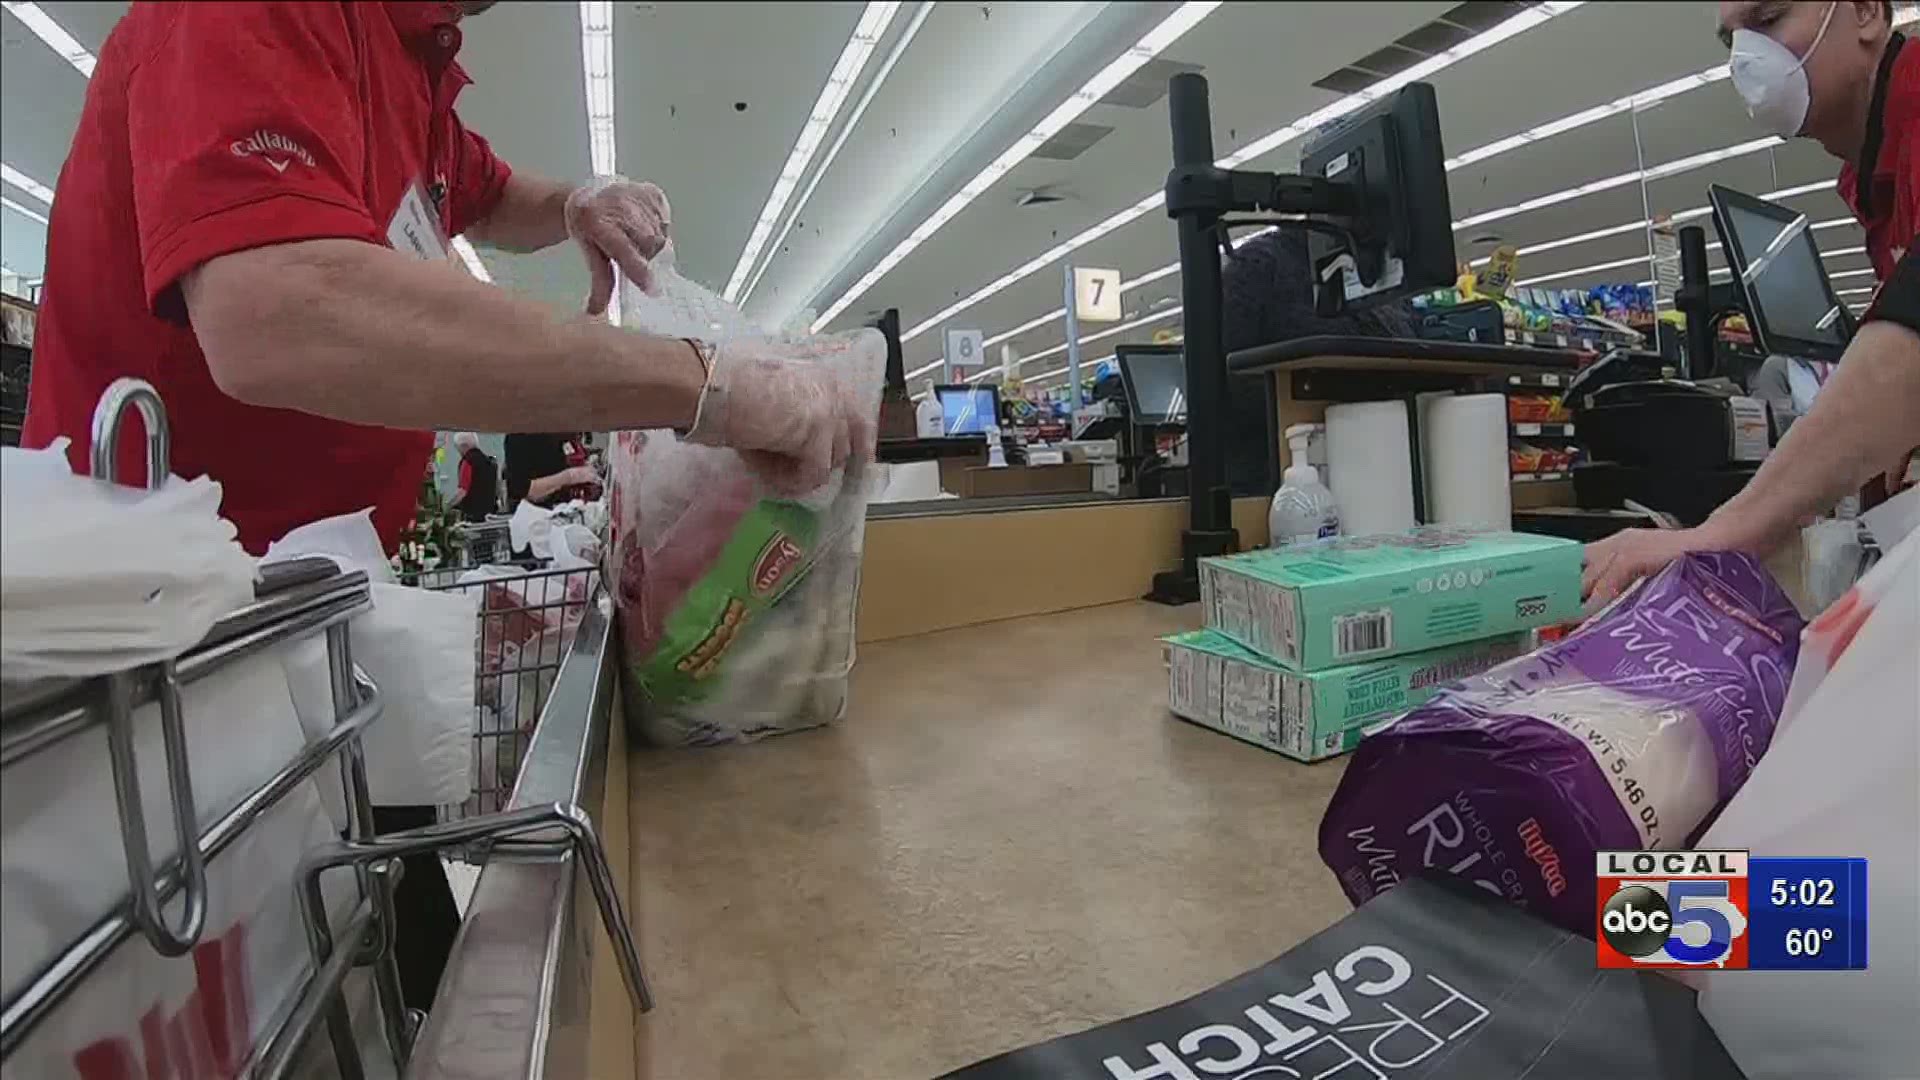 Fareway and Hy-Vee—two Iowa-based grocers—have seen paper and personal hygiene products fly off the shelves.